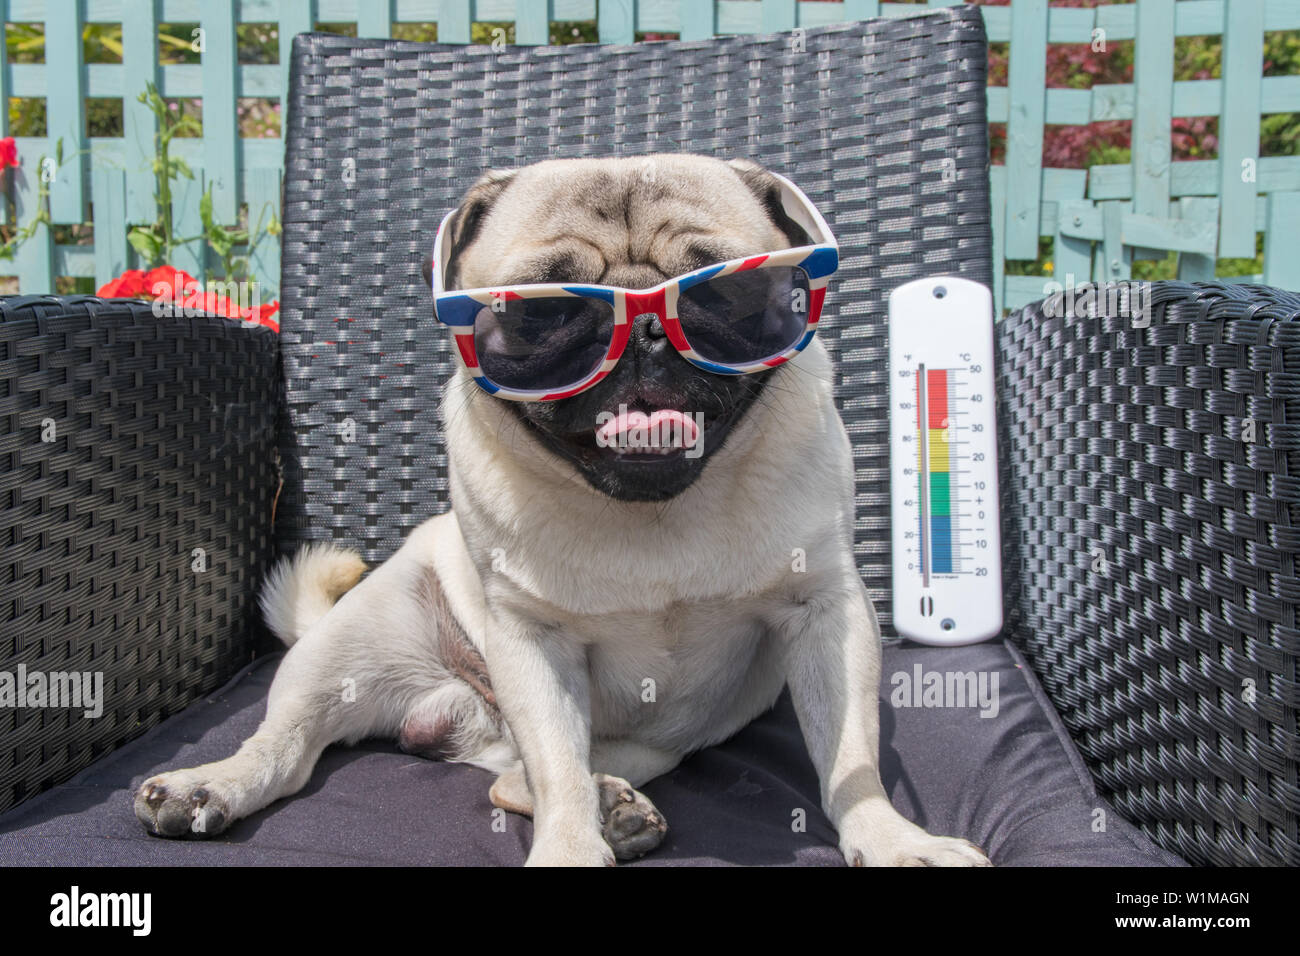 Pug dog sitting on chair, wearing sunglasses, panting,  in hot weather with a thermometer in the background. Stock Photo